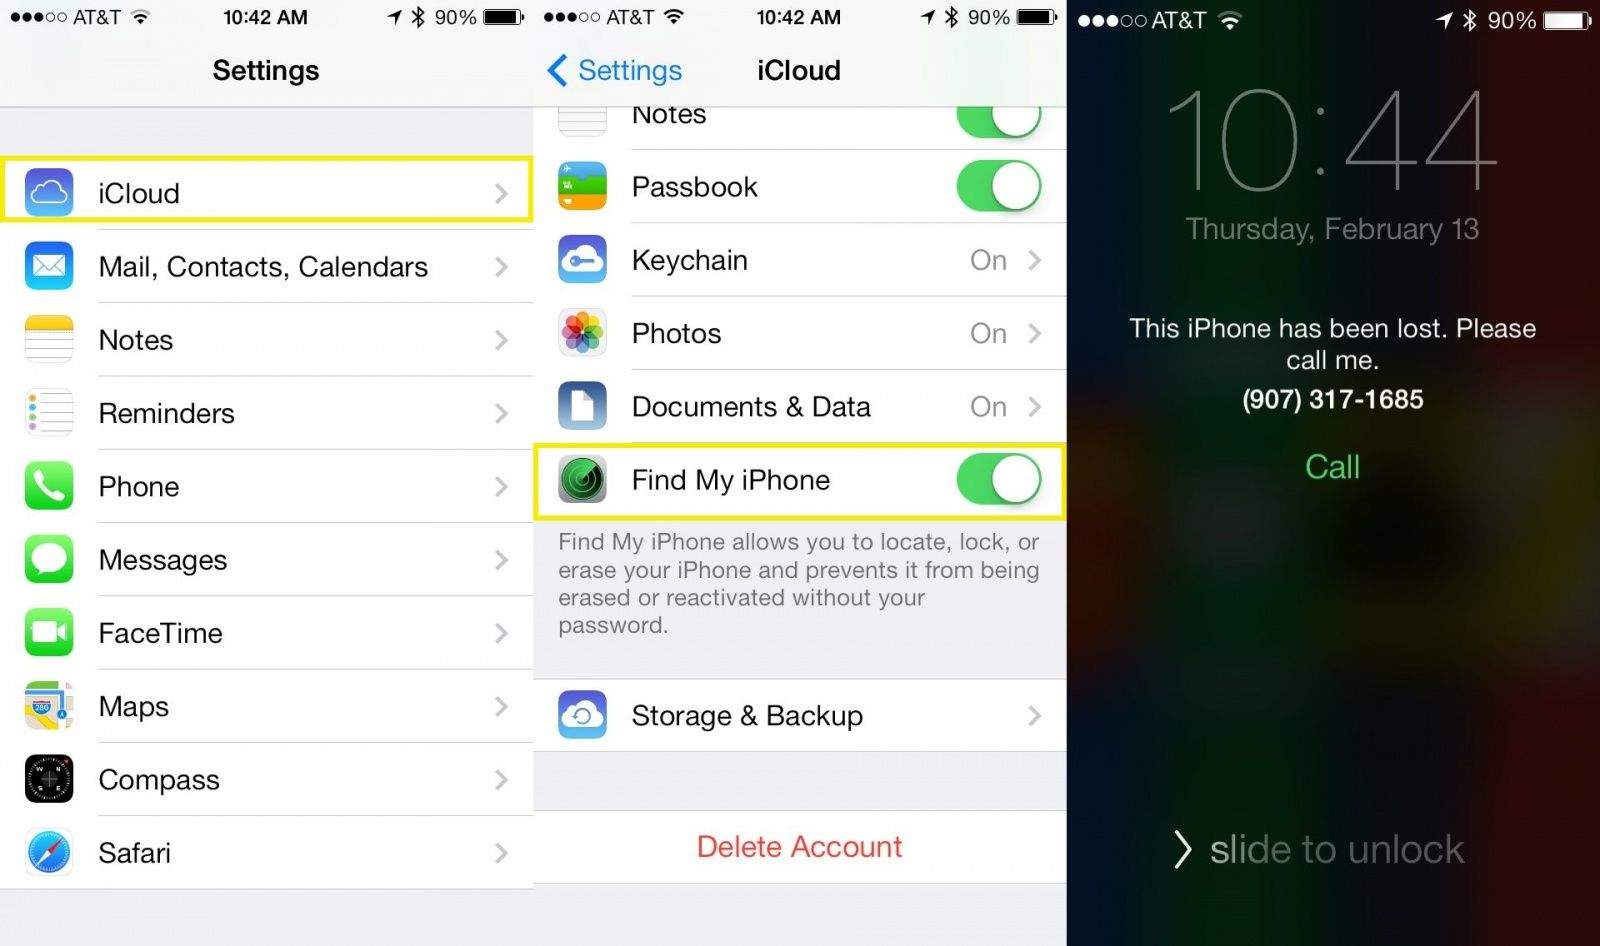 How To Remotely Wipe Your iPhone Data When Stolen [iOS Tips]